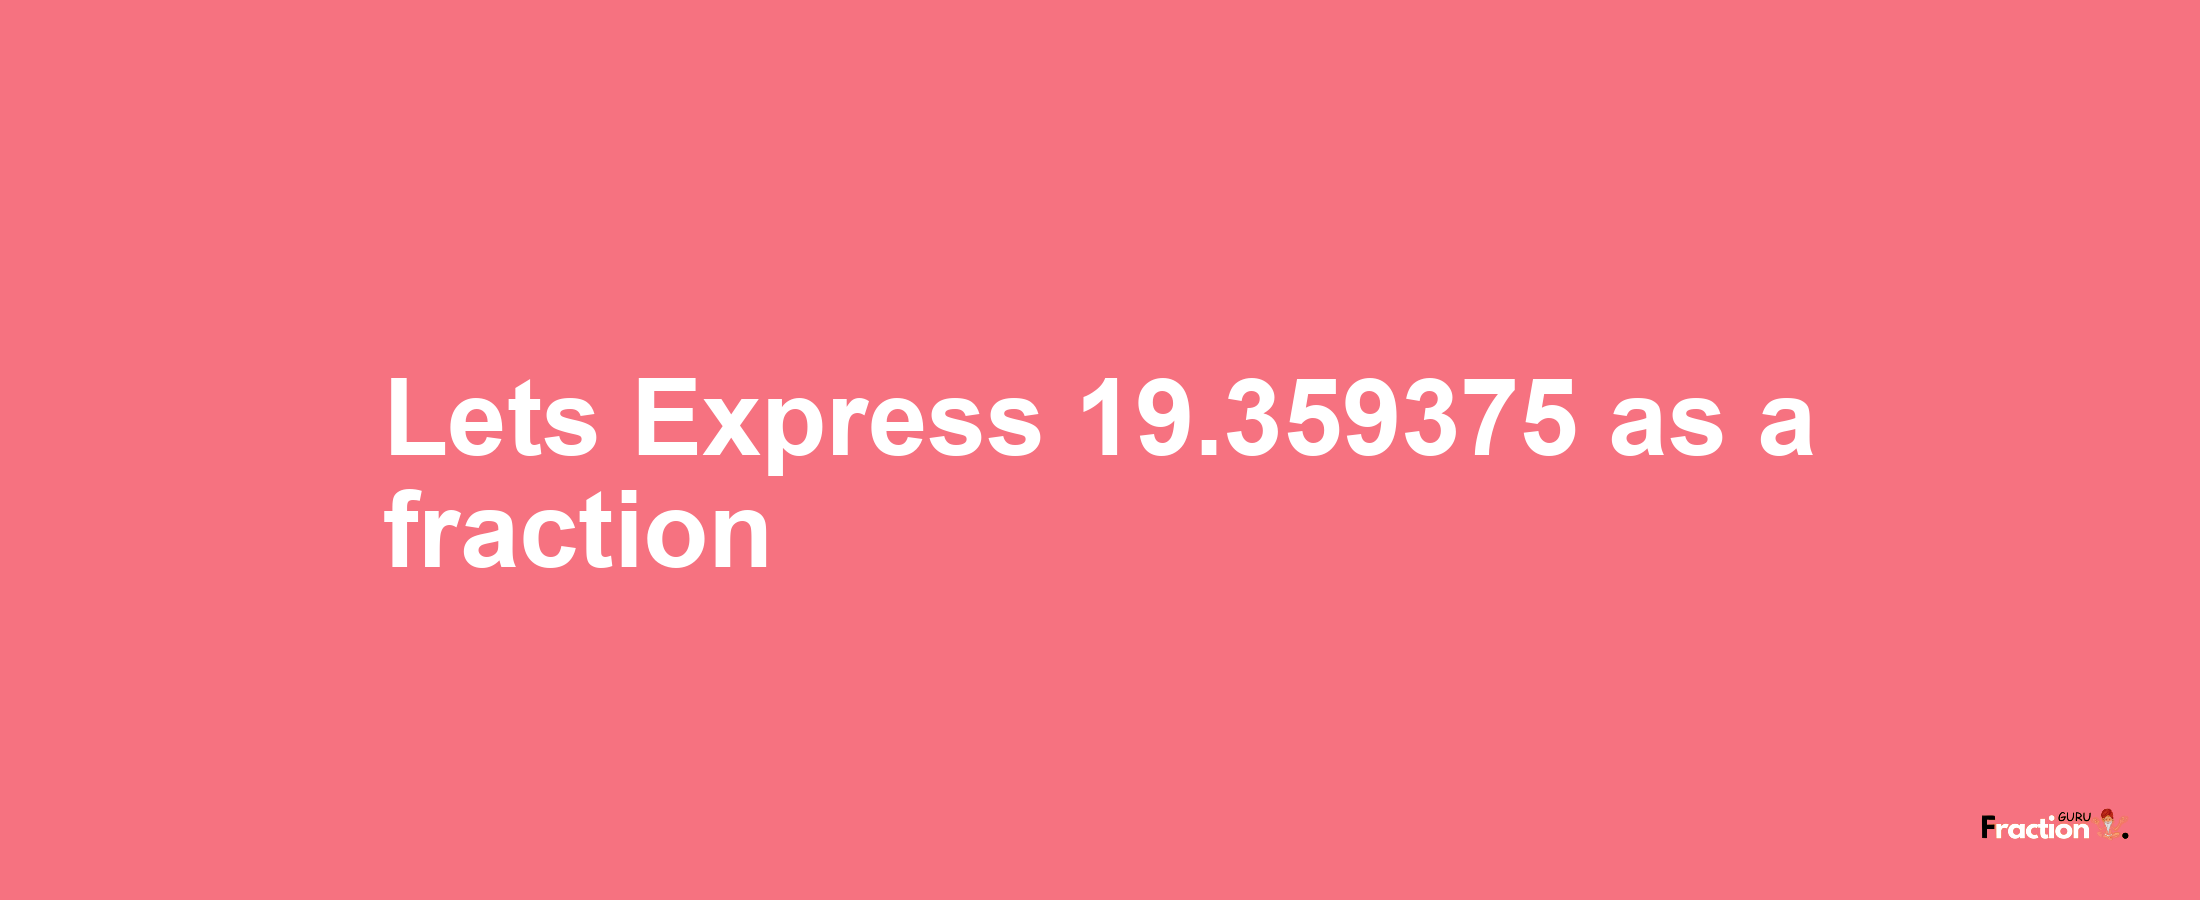 Lets Express 19.359375 as afraction